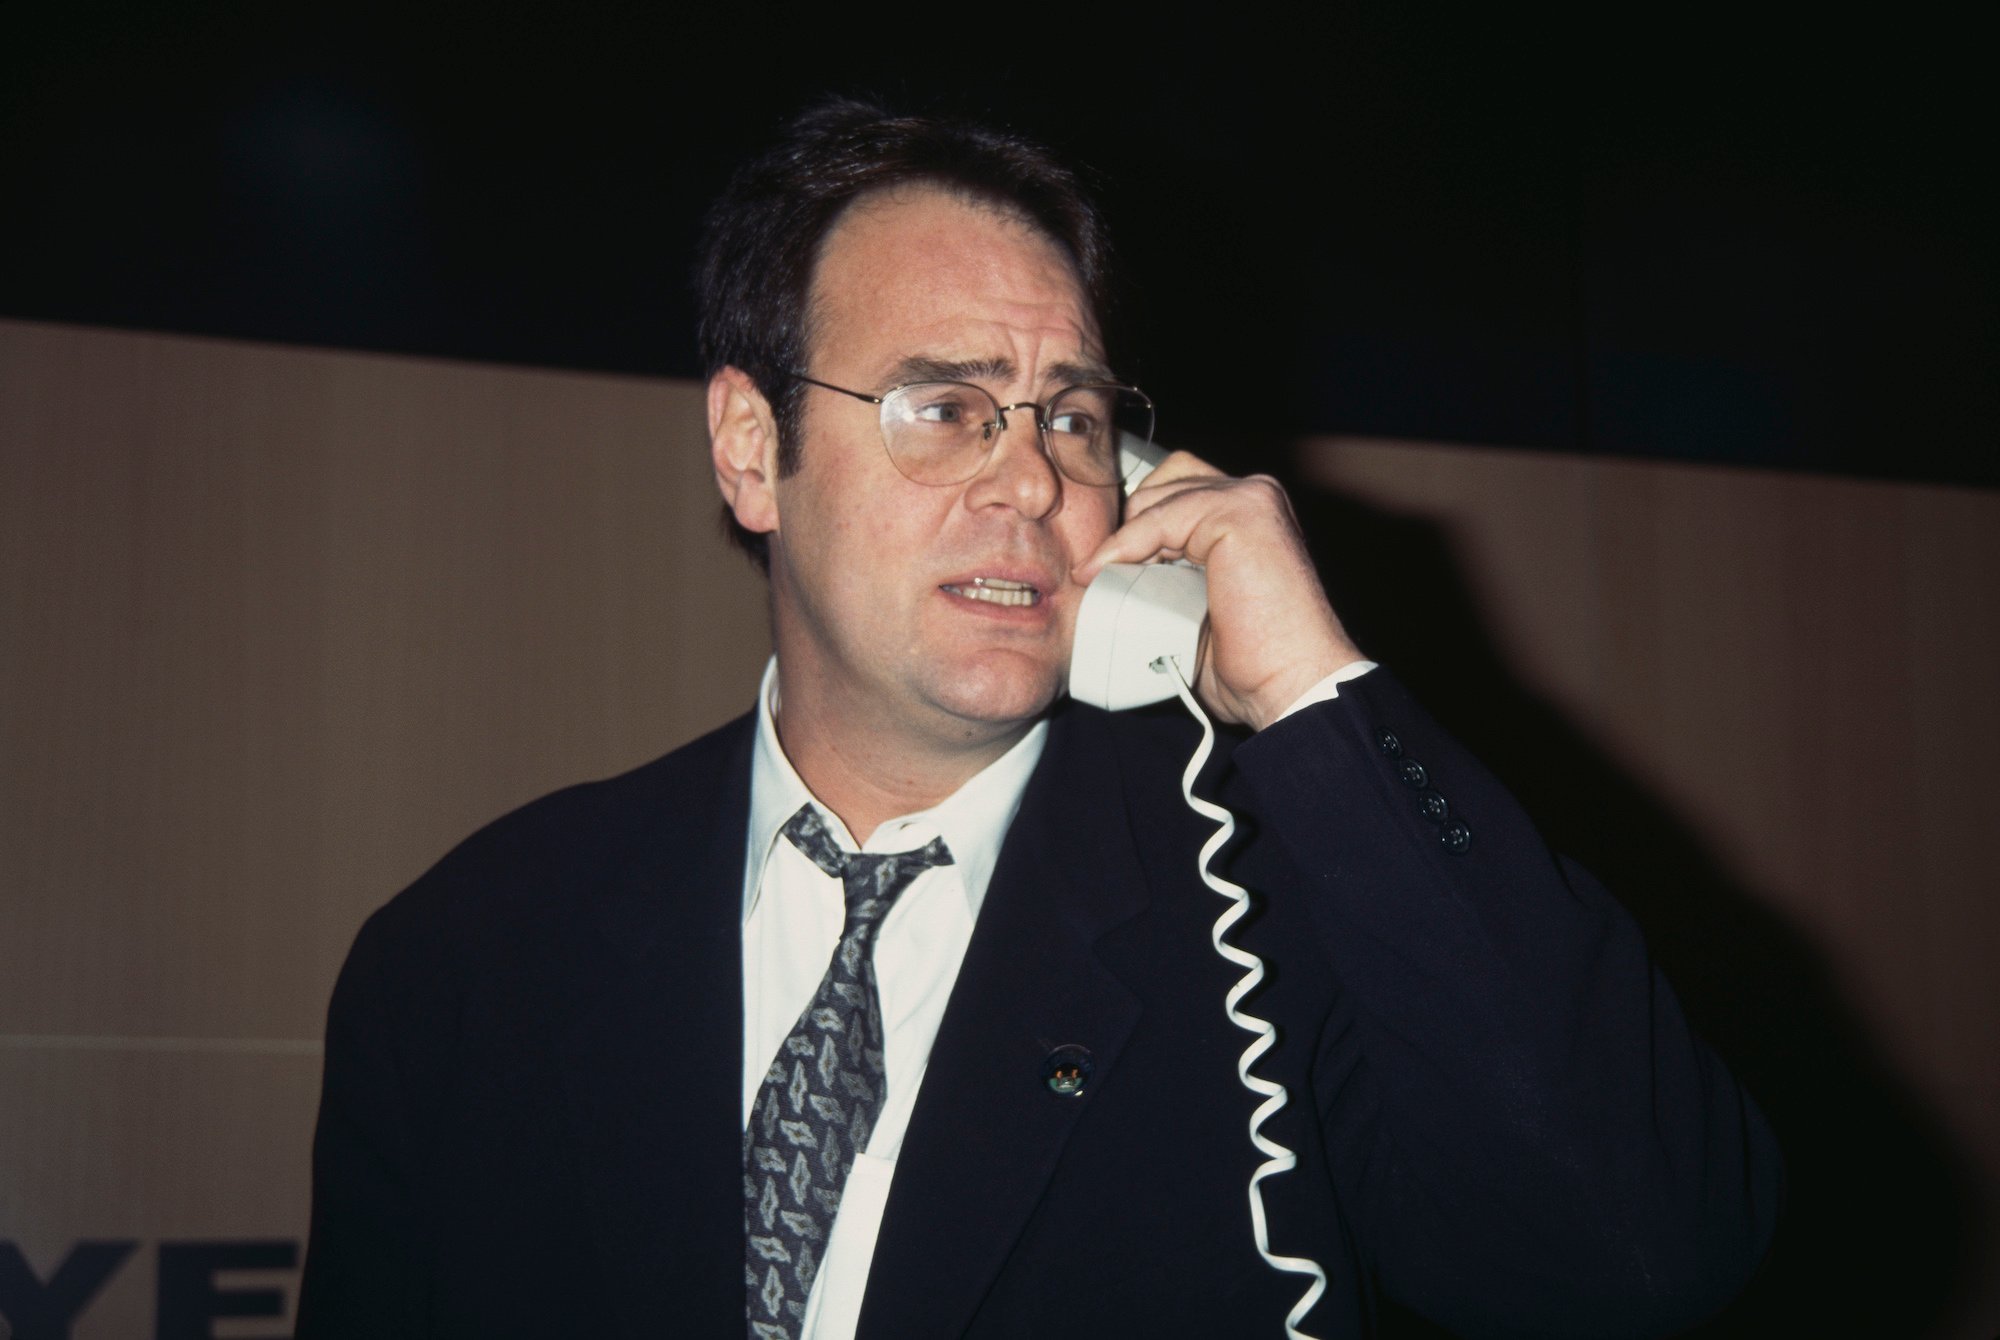 Dan Aykroyd turned to the side, on a corded phone